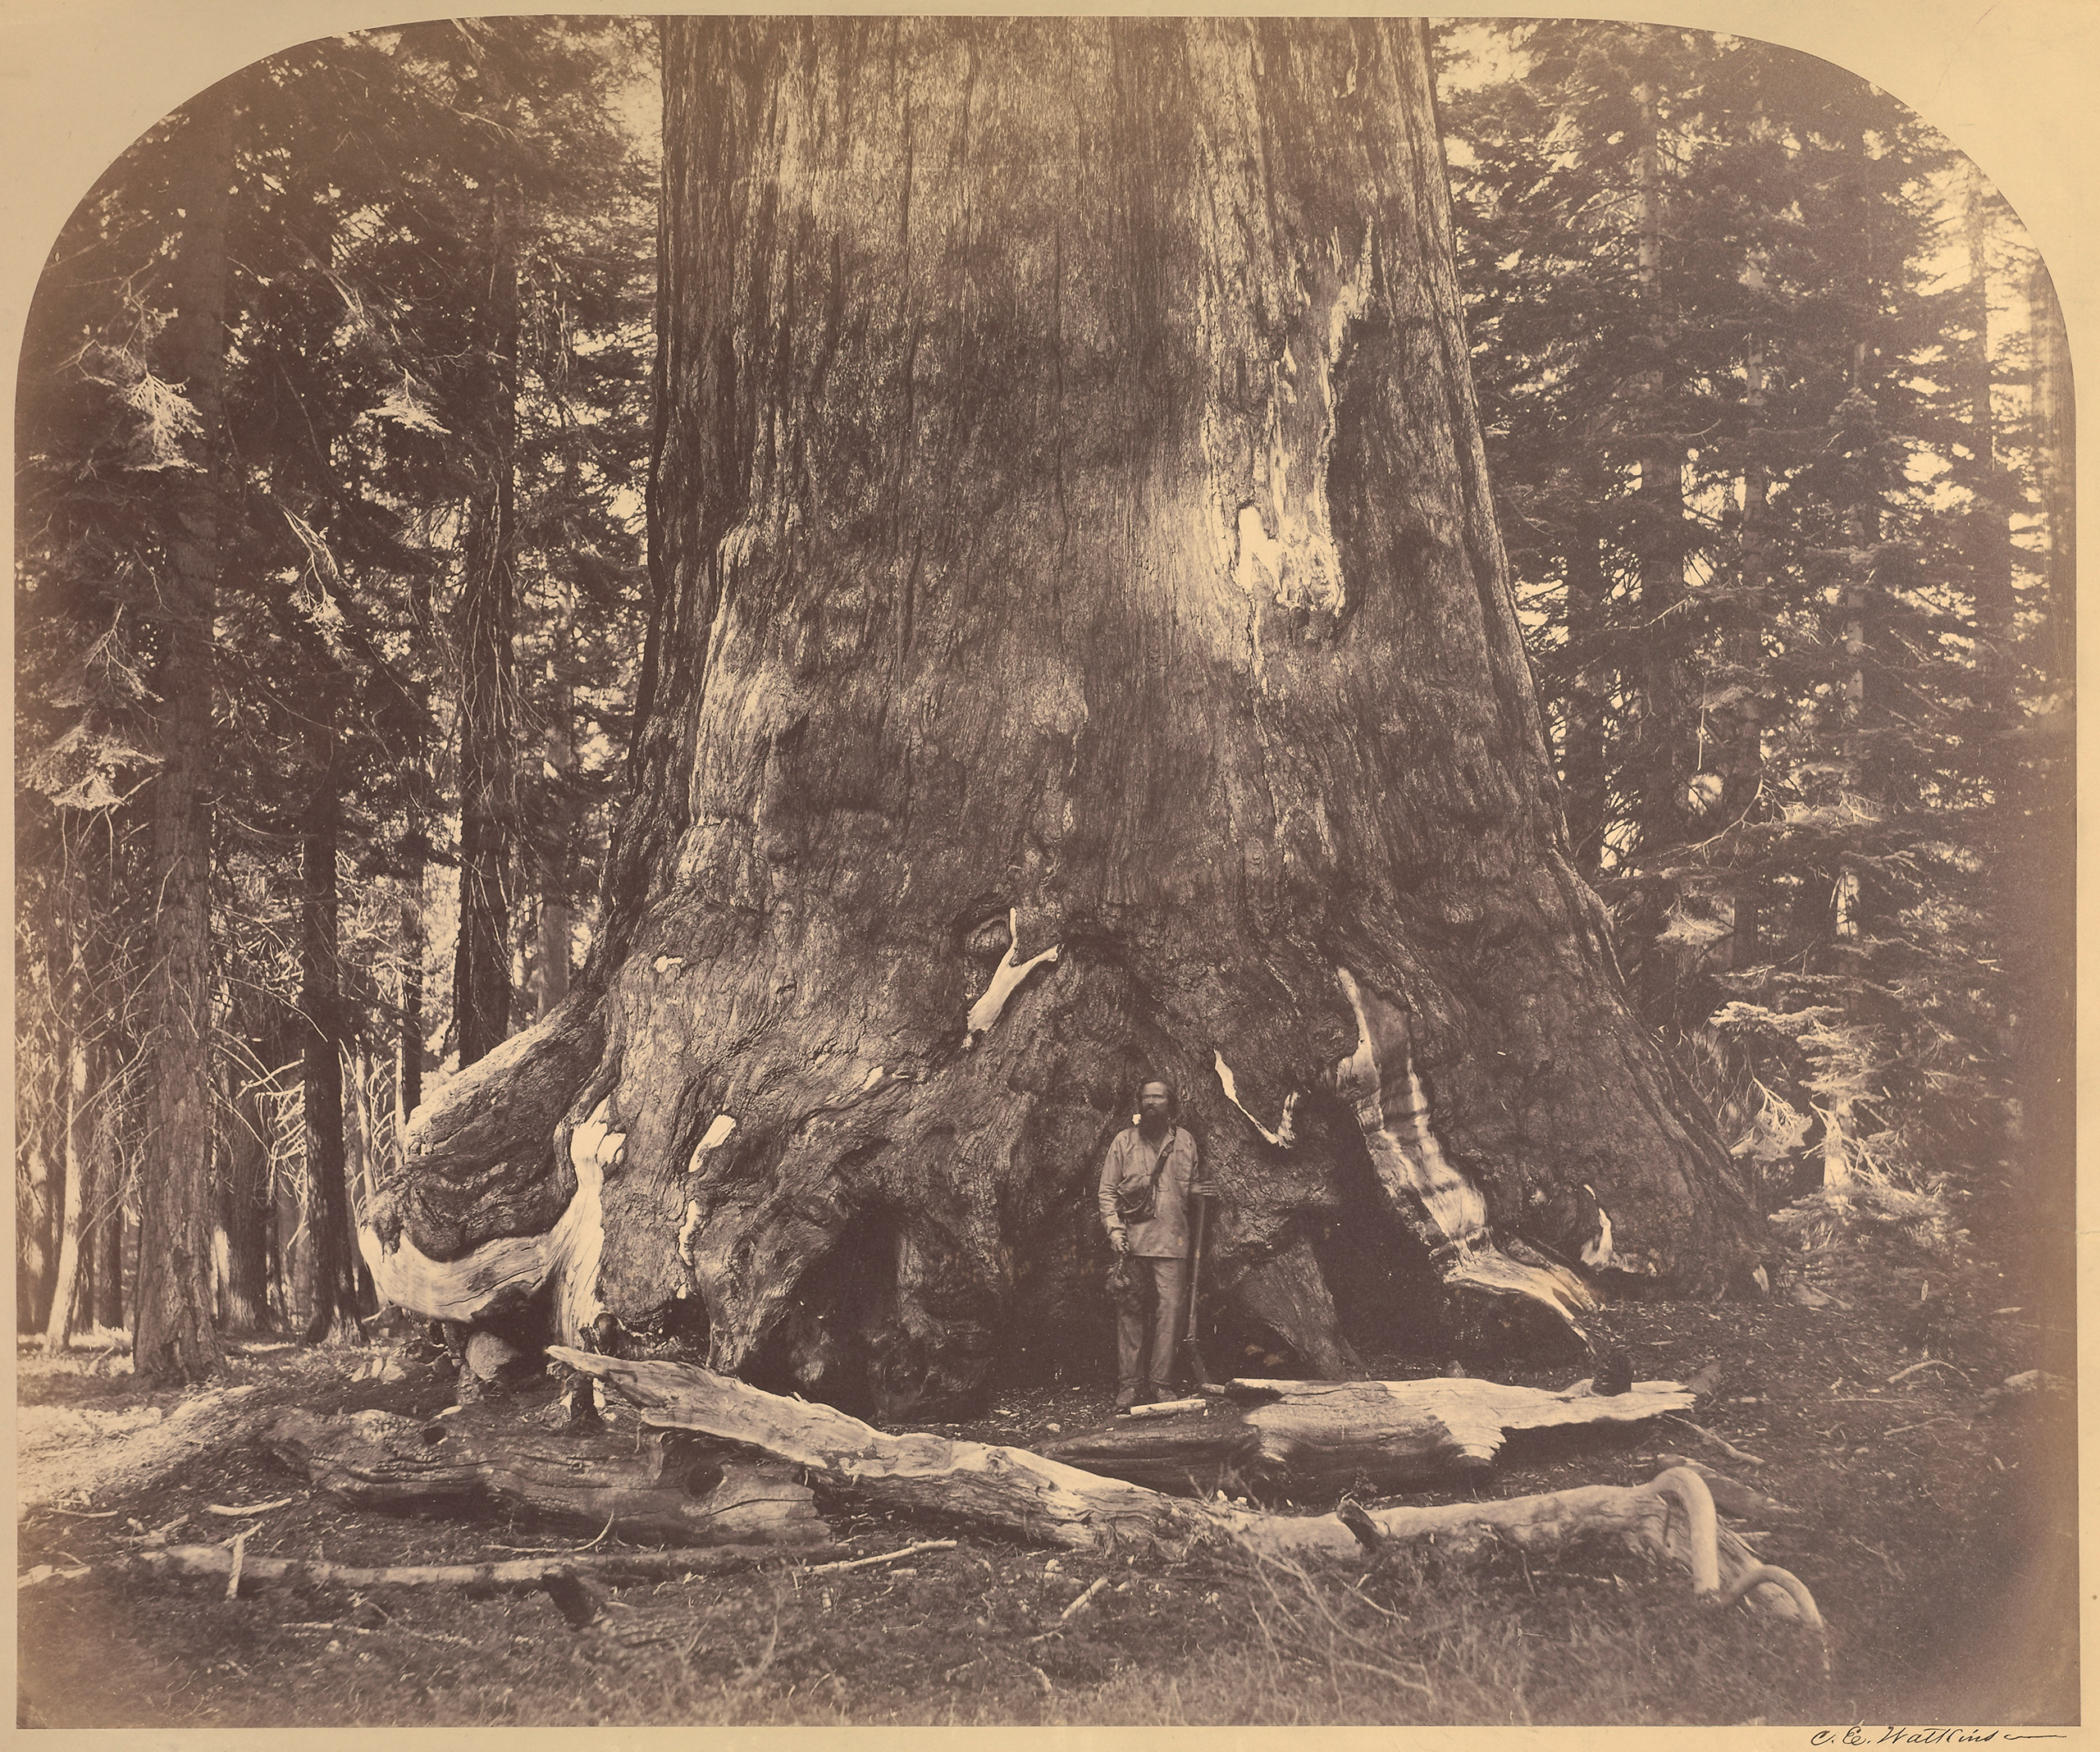 Section of the Grizzly Giant, Mariposa Grove, Yo semite. 1861.